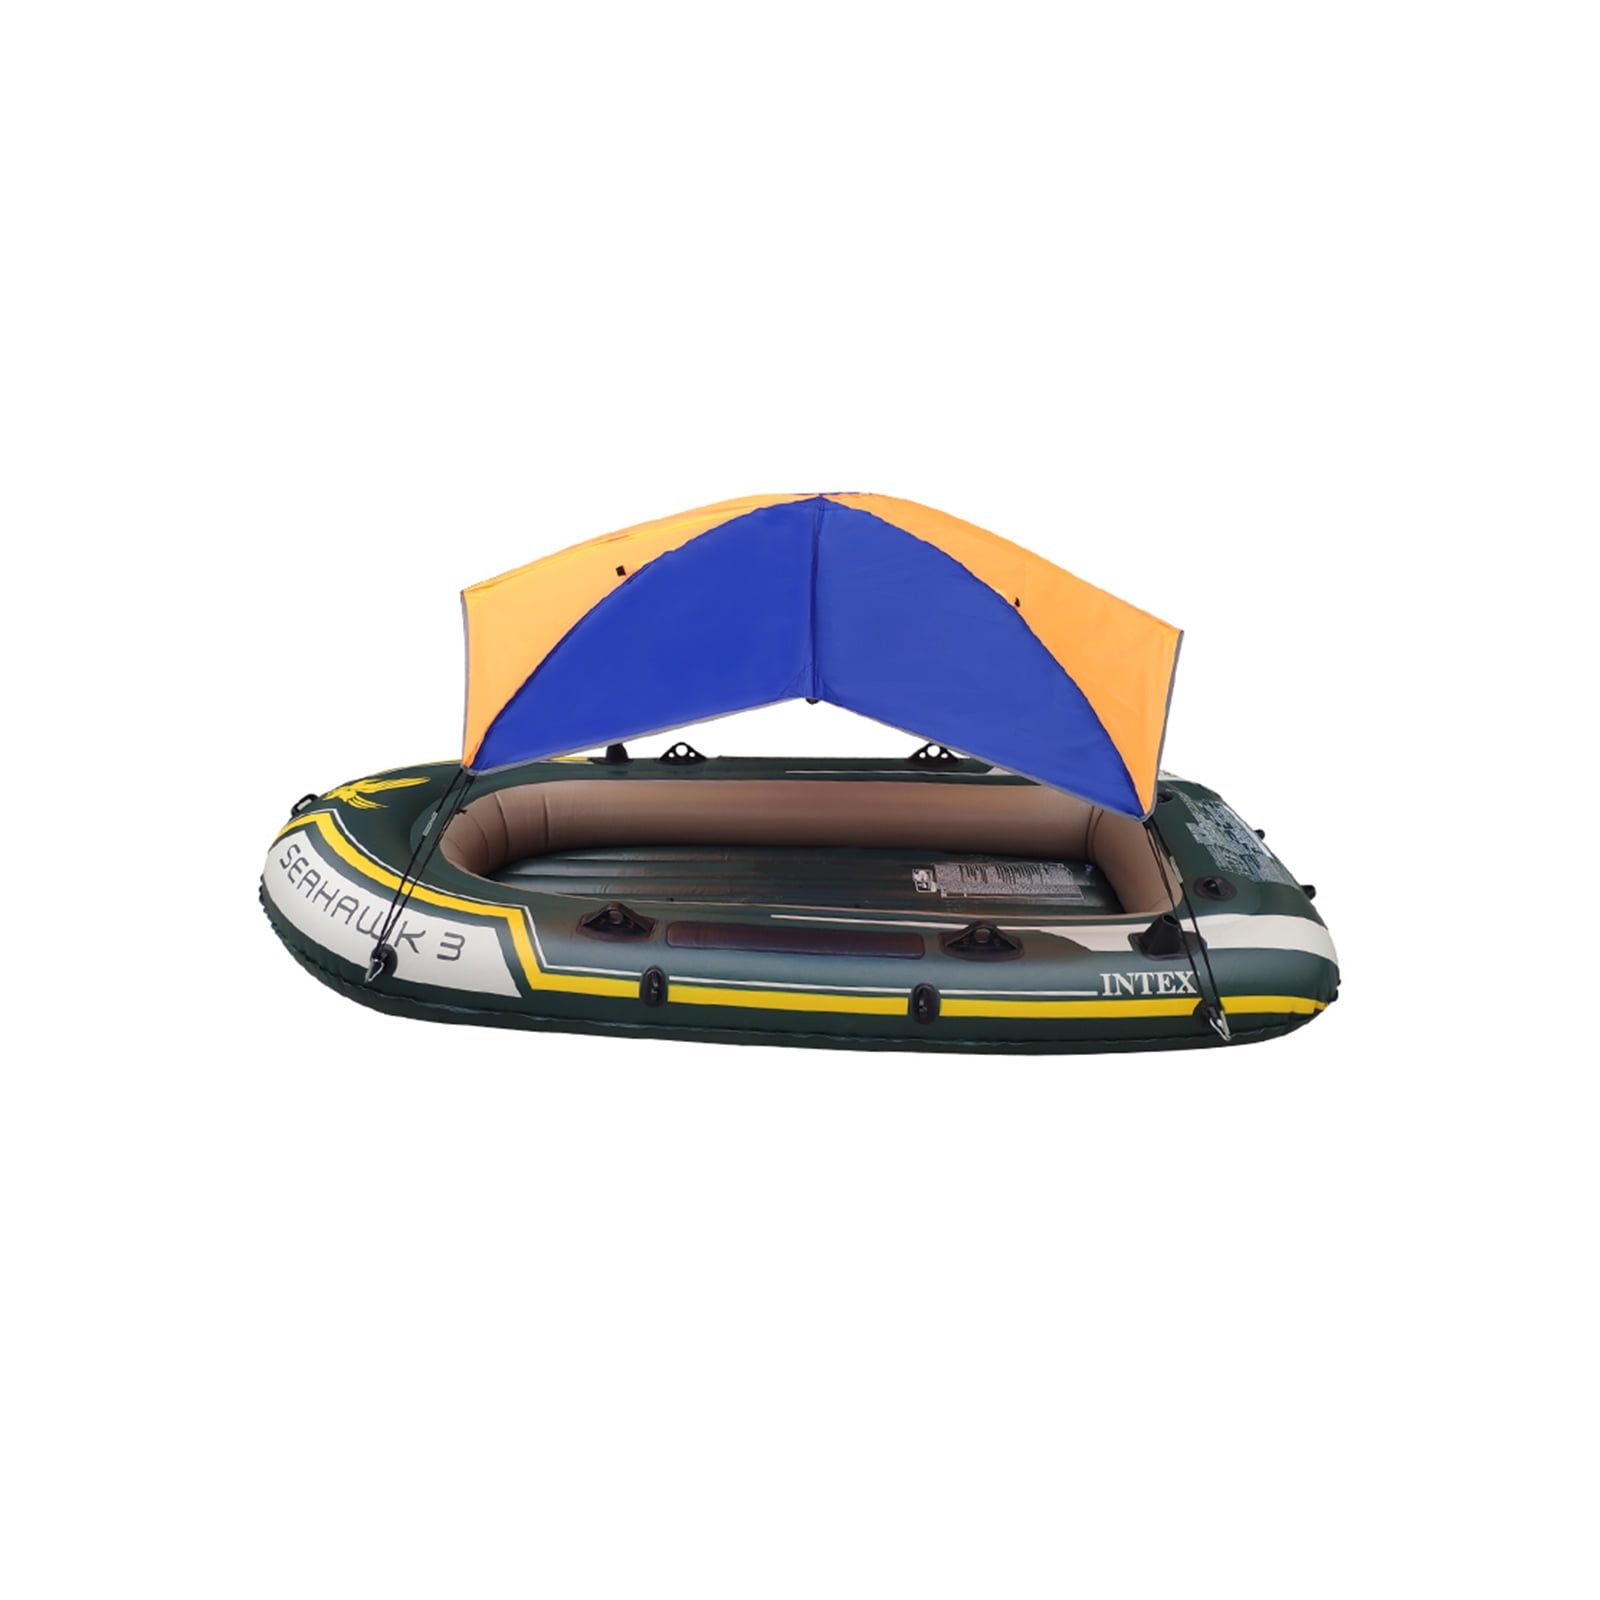 2/4Person Inflatable Fishing Boat Awning Canopy UV Sun Shade Shelter Rain Cover 